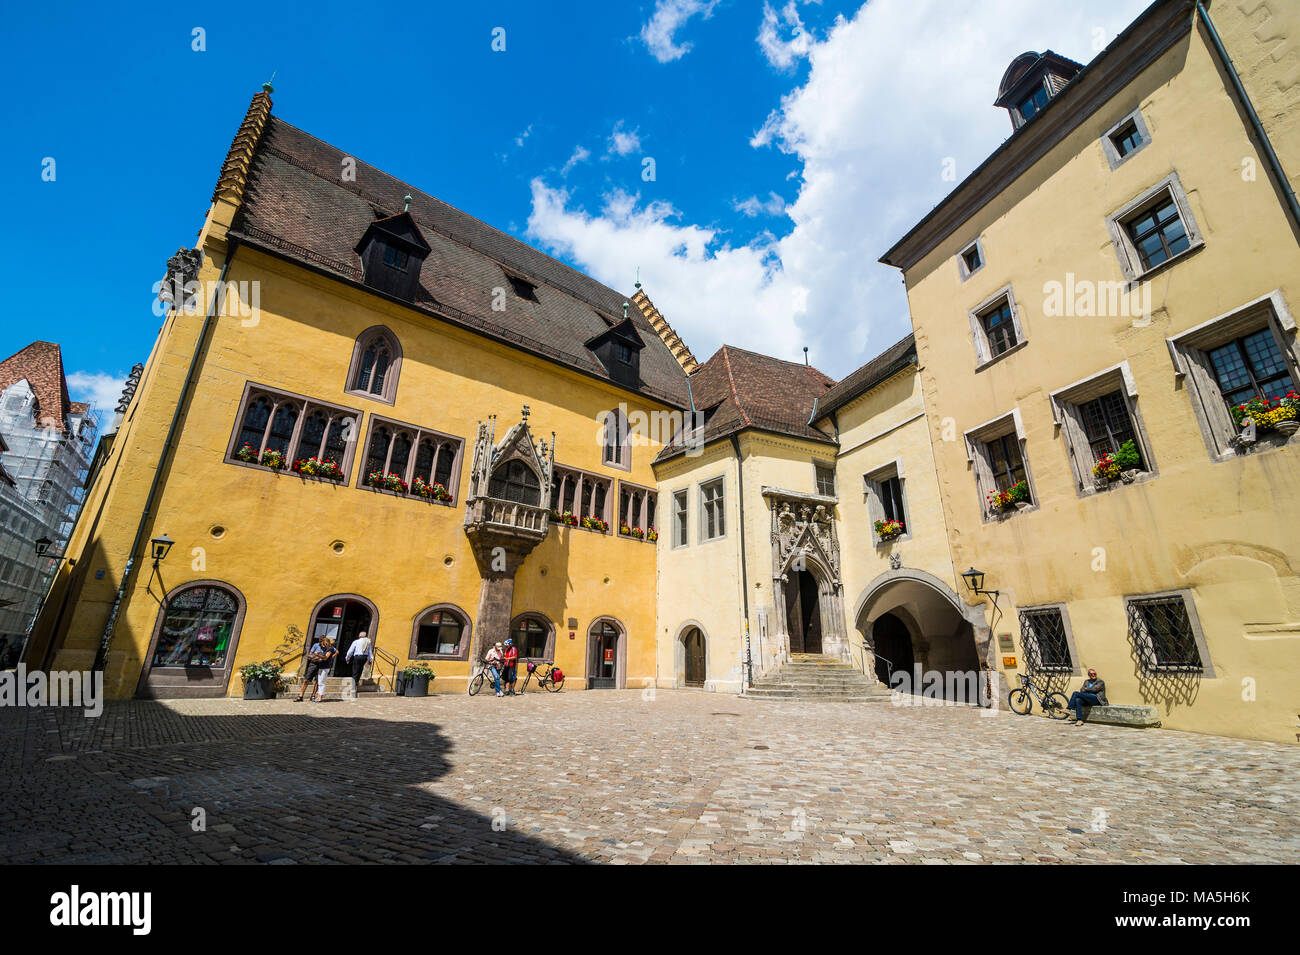 Kohlenmarkt with Town Hall, site of the Perpetual Diet from 1663 to 1806, Unesco world heritage sight, Regensburg, Bavaria, Germany Stock Photo